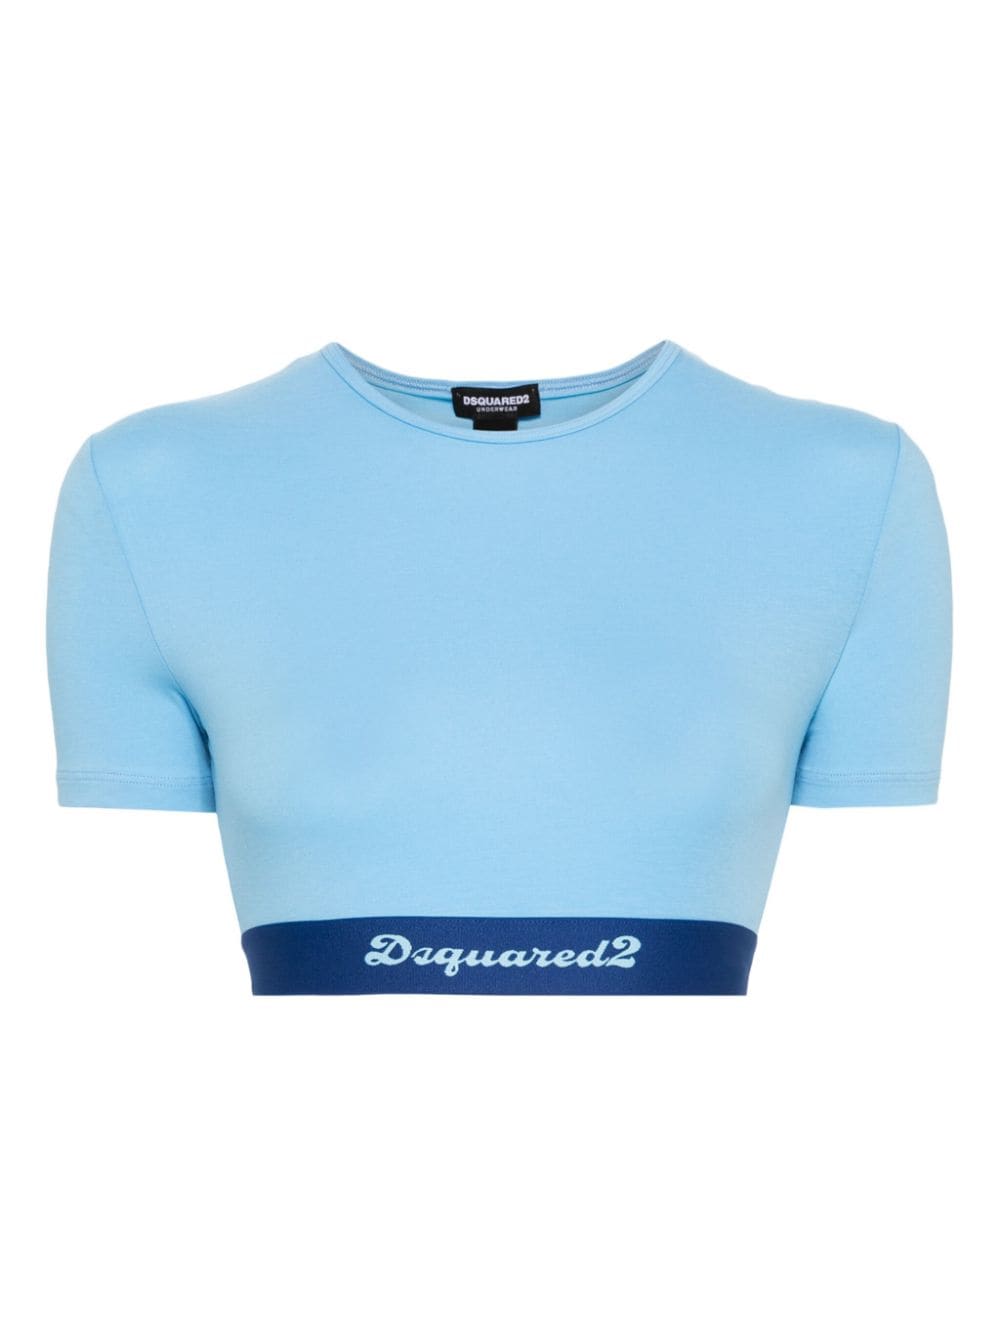 Dsquared2 logo-waistband cropped top - Blue von Dsquared2